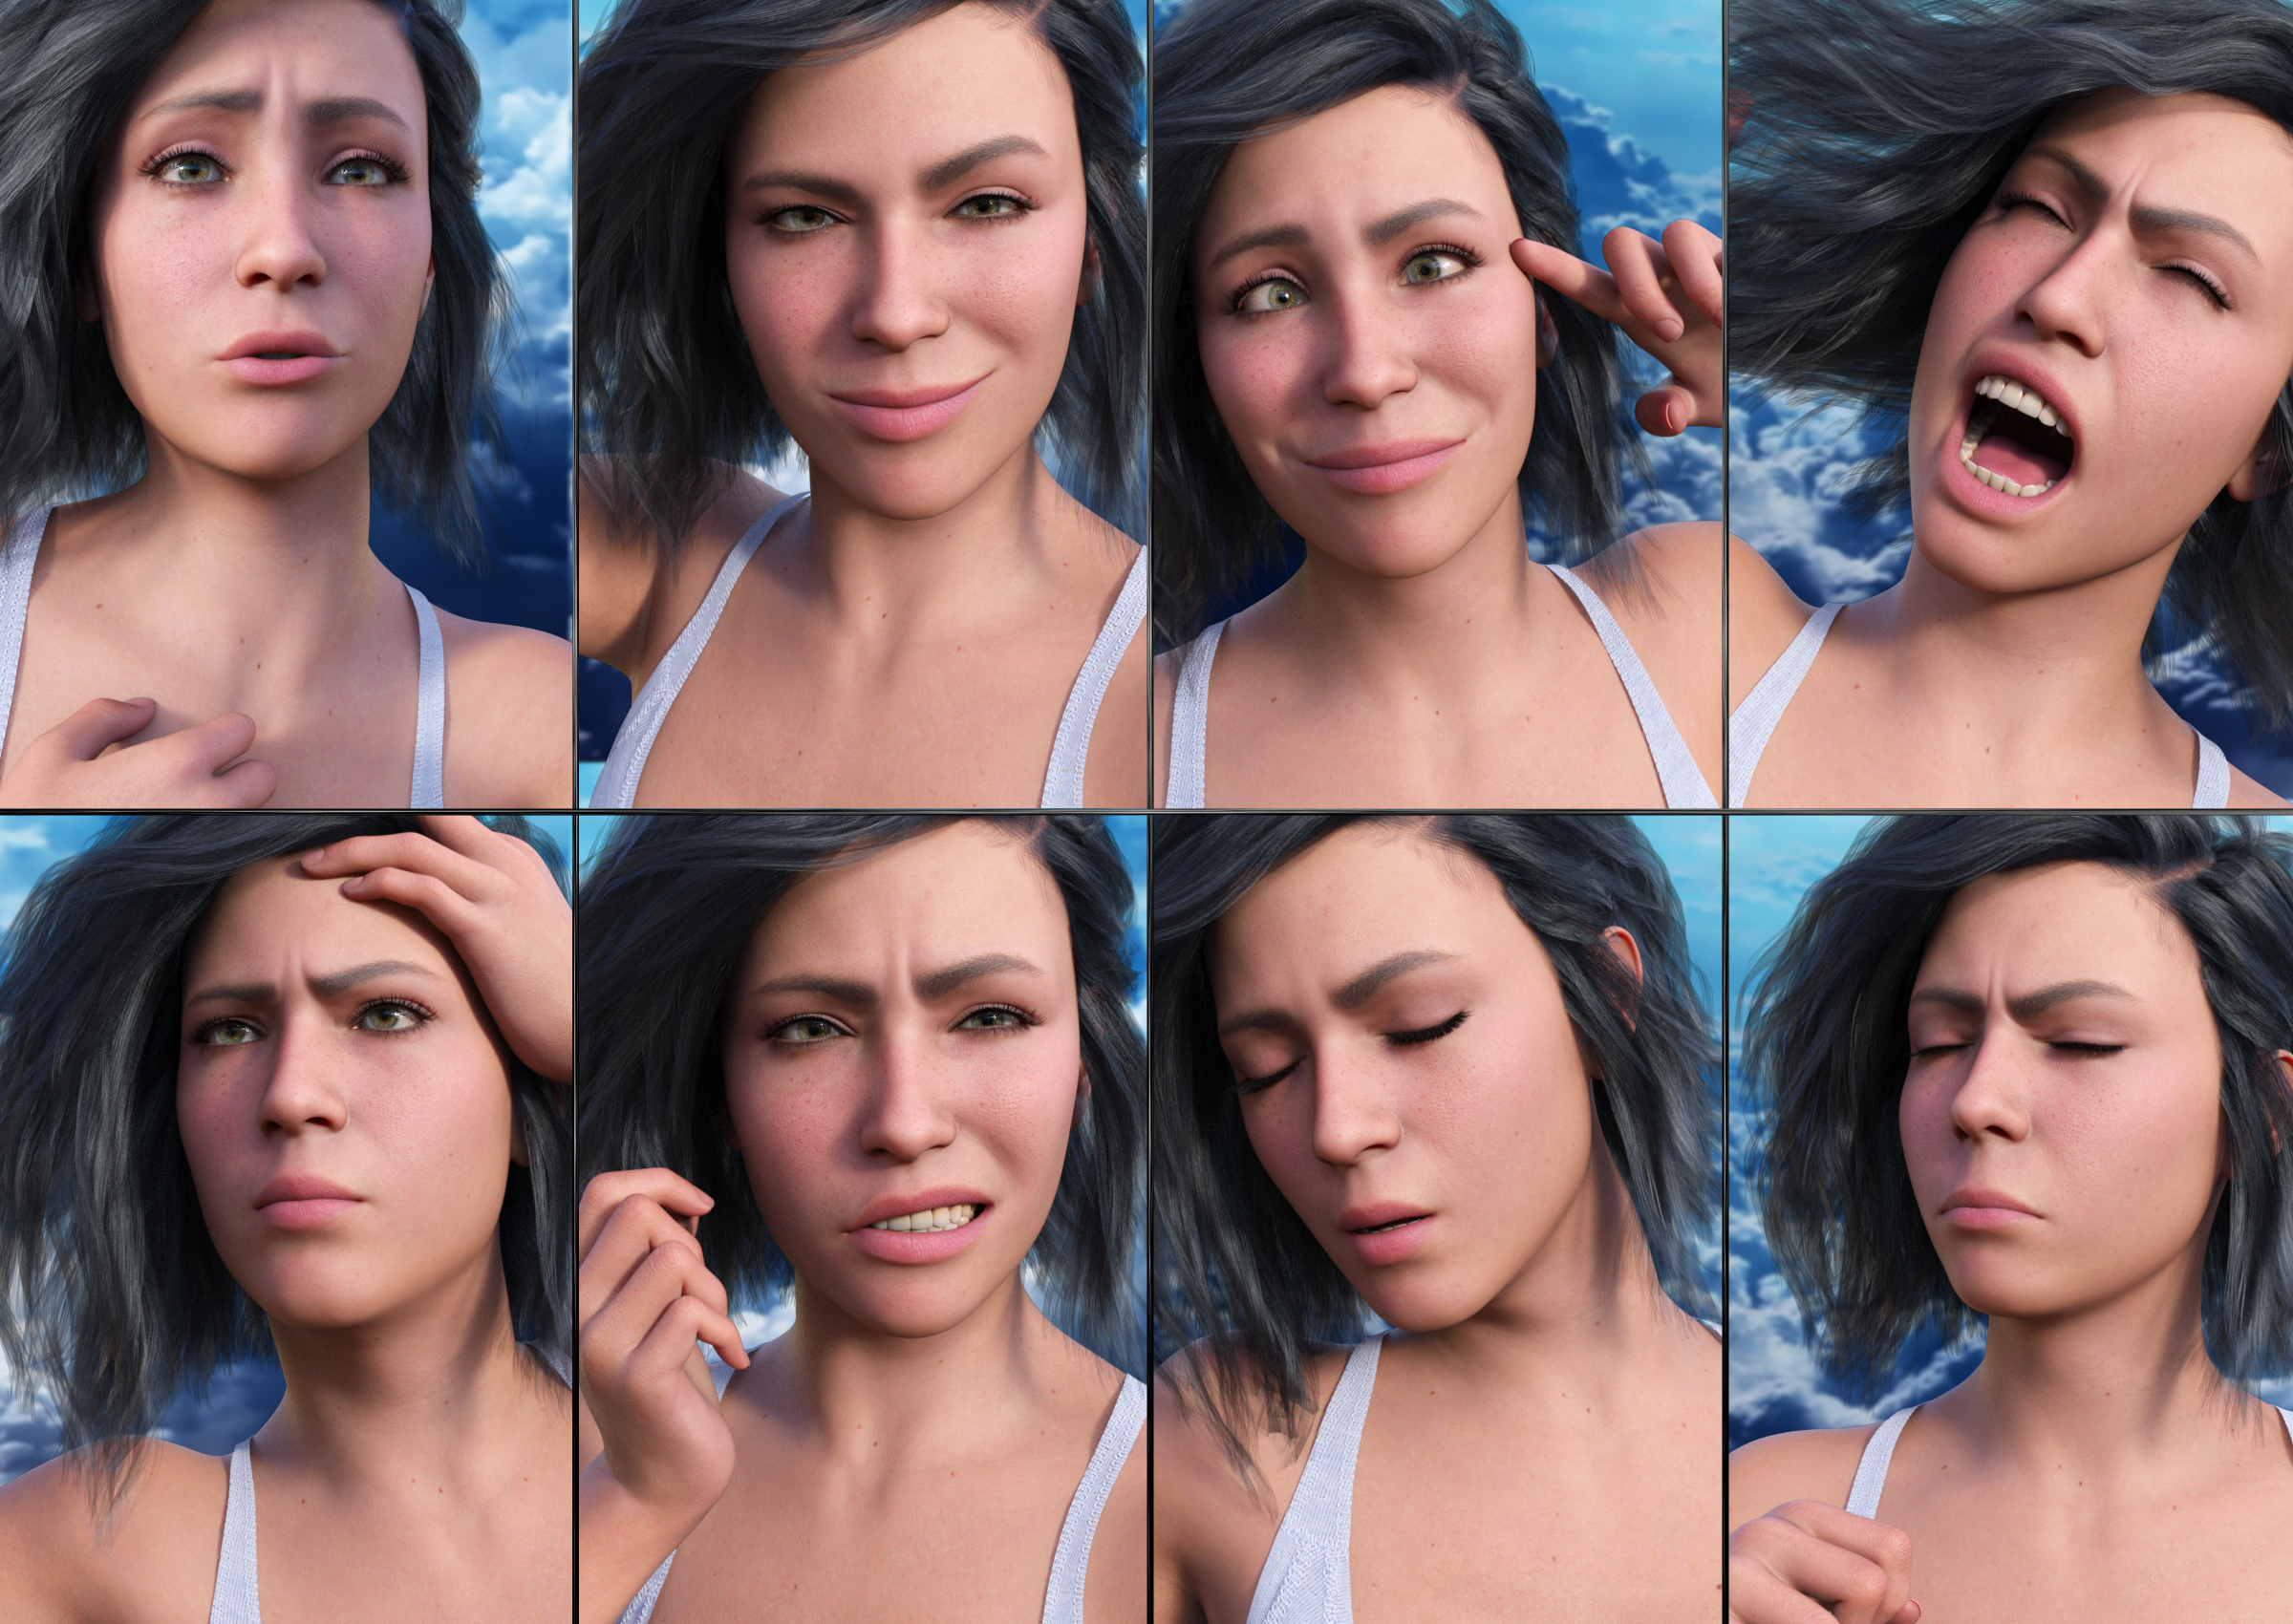 JW Expressive Faces Expressions for Genesis 9 by: JWolf, 3D Models by Daz 3D